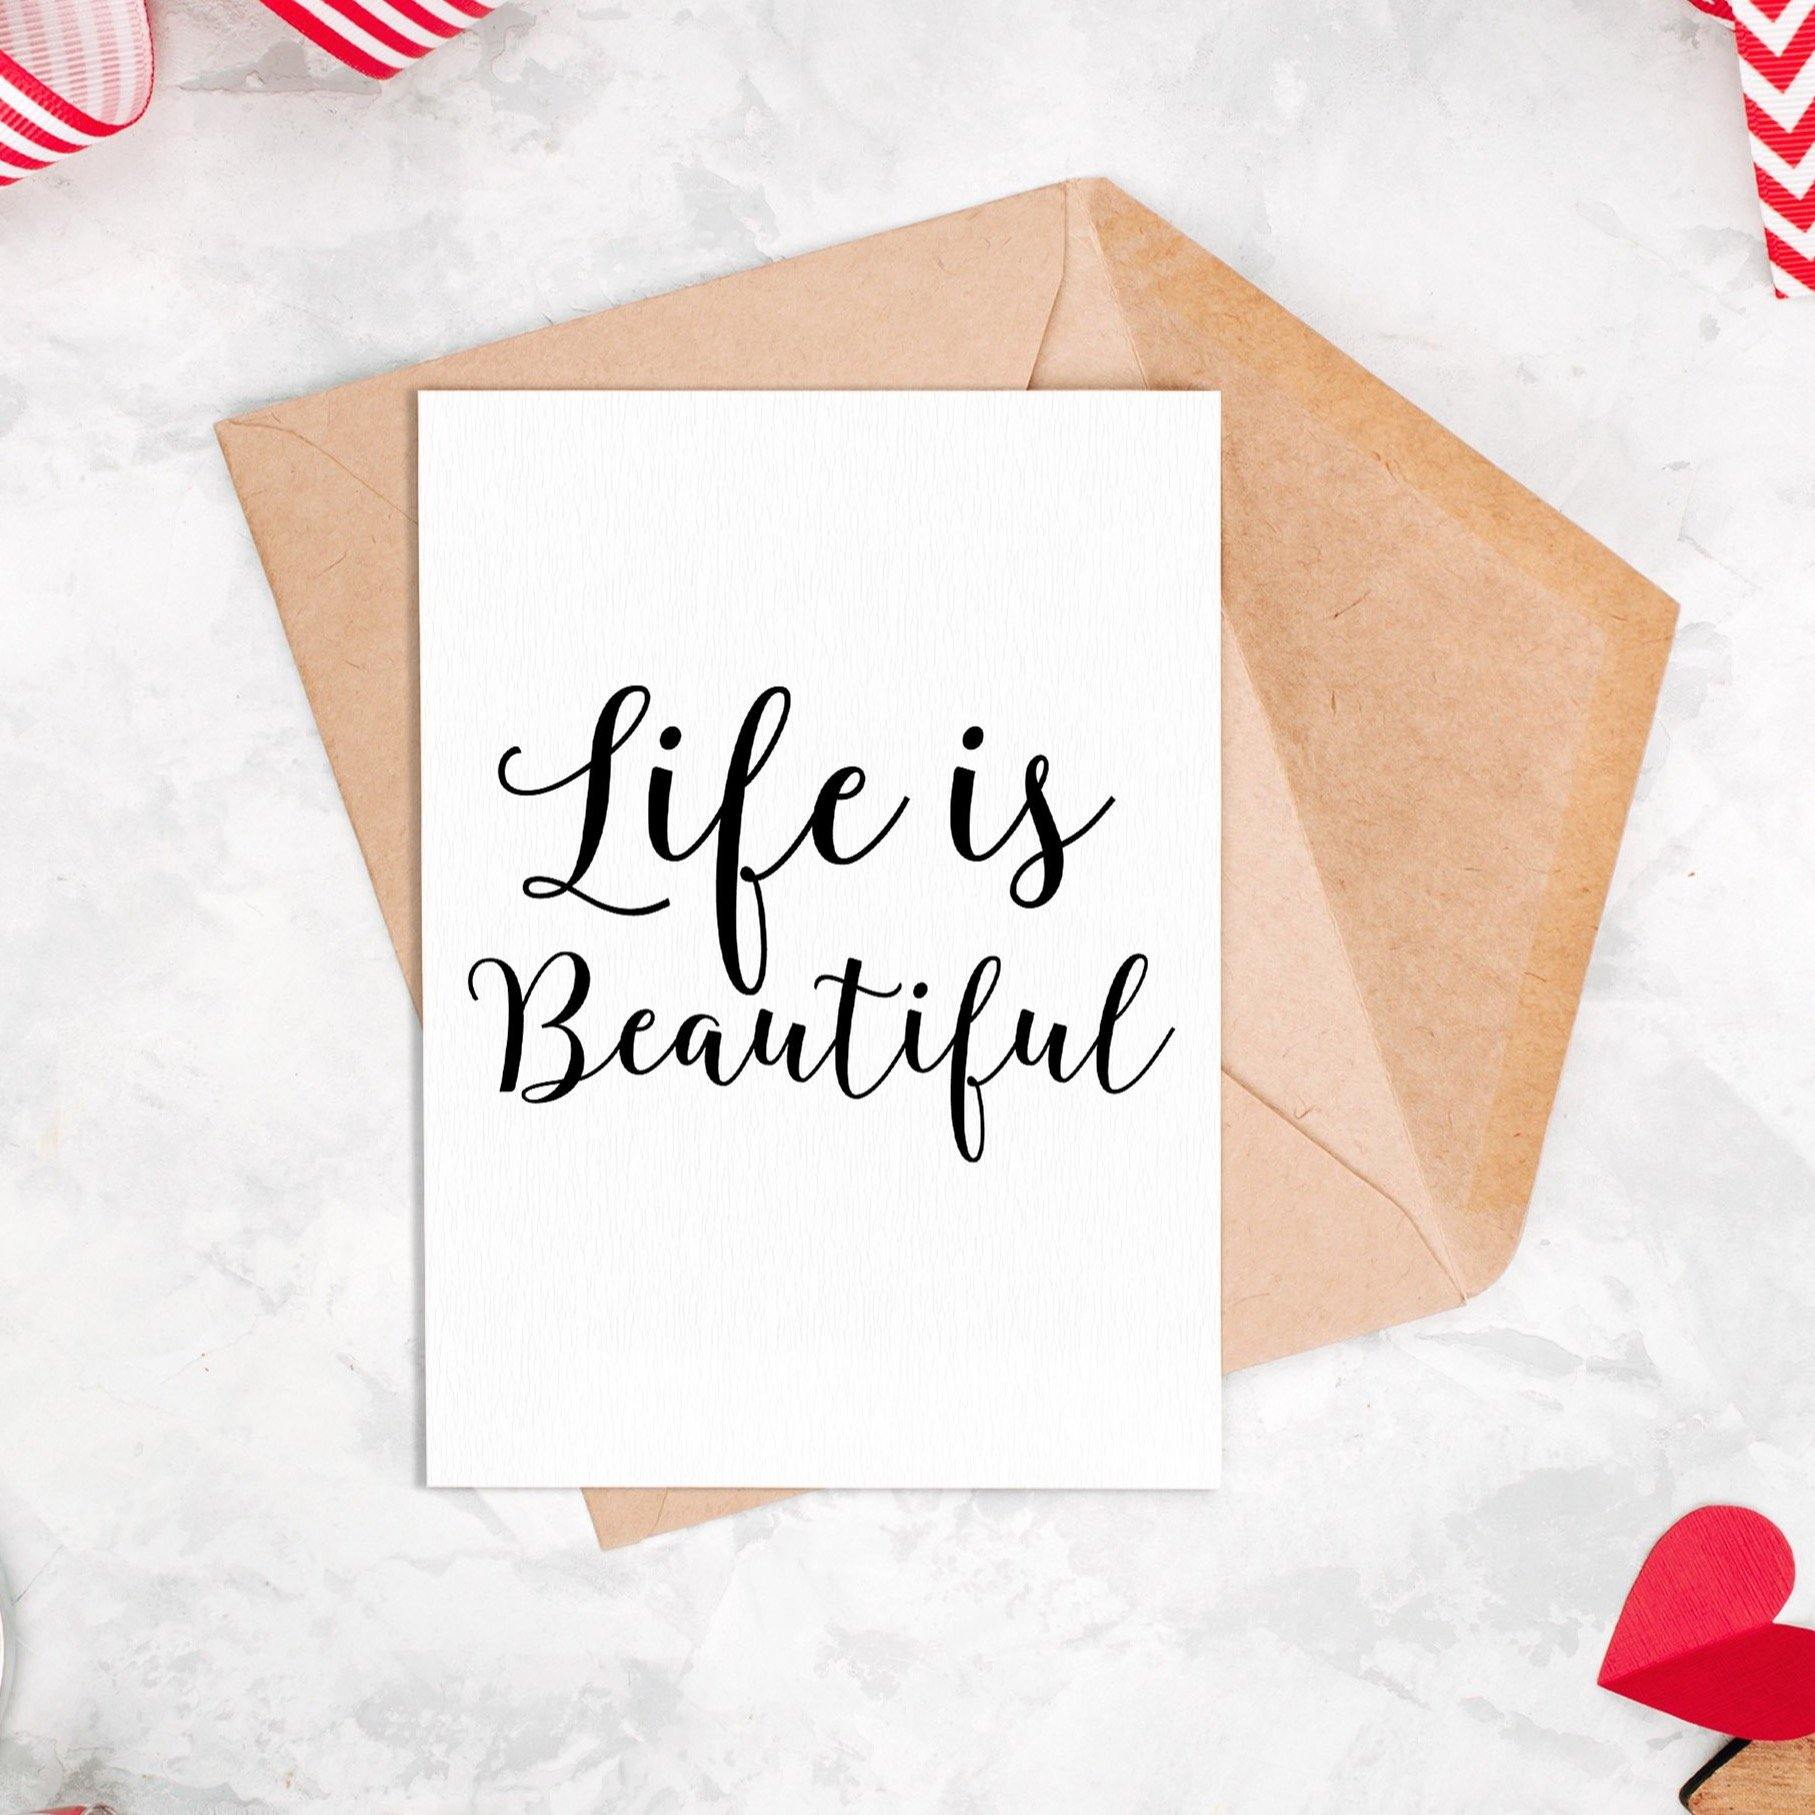 LIFE IS BEAUTIFUL Print | Happy Poster Wall Art | Home Decor Poster | Typography Print | Quote Print